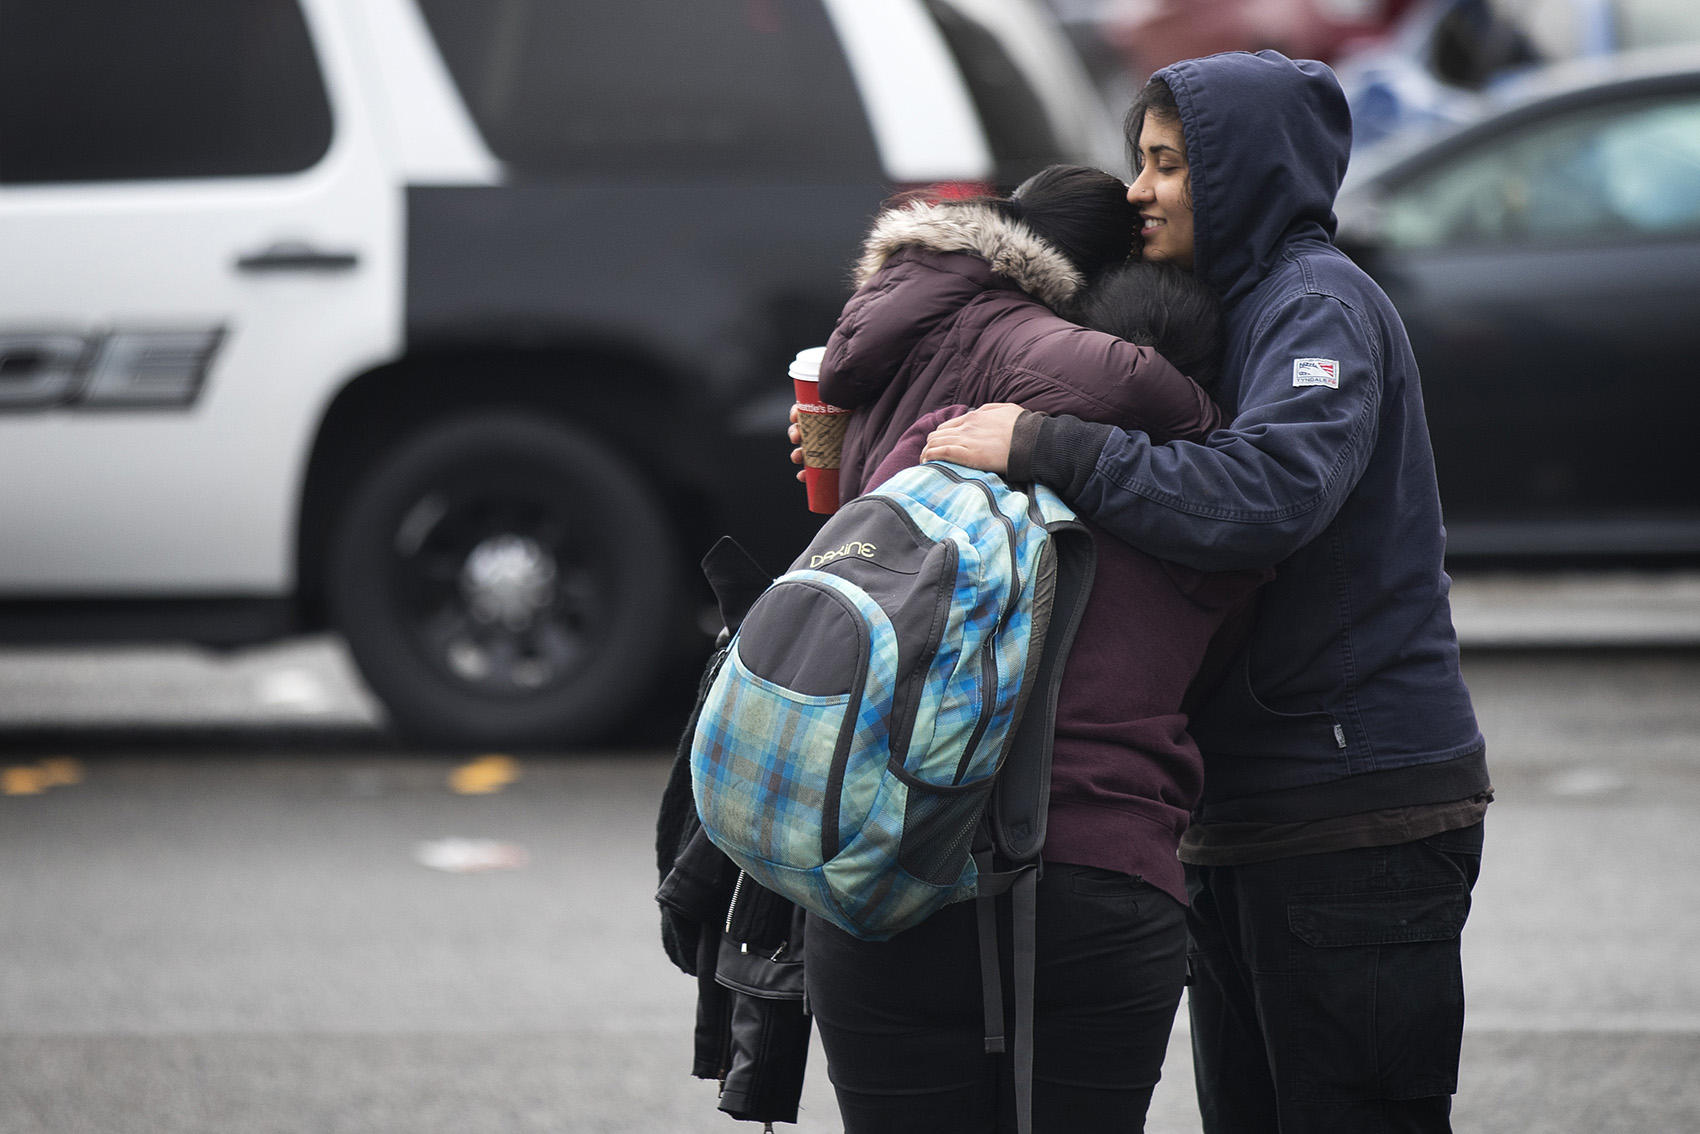 Harsimran Bagri, 24, right, and Gurkeert Bagri, 26, left, hug their 16-year-old sister, center, who was inside the college during the lockdown on Friday, Feb. 16, 2018, outside of Highline College in Des Moines. CREDIT: KUOW PHOTO/MEGAN FARMER